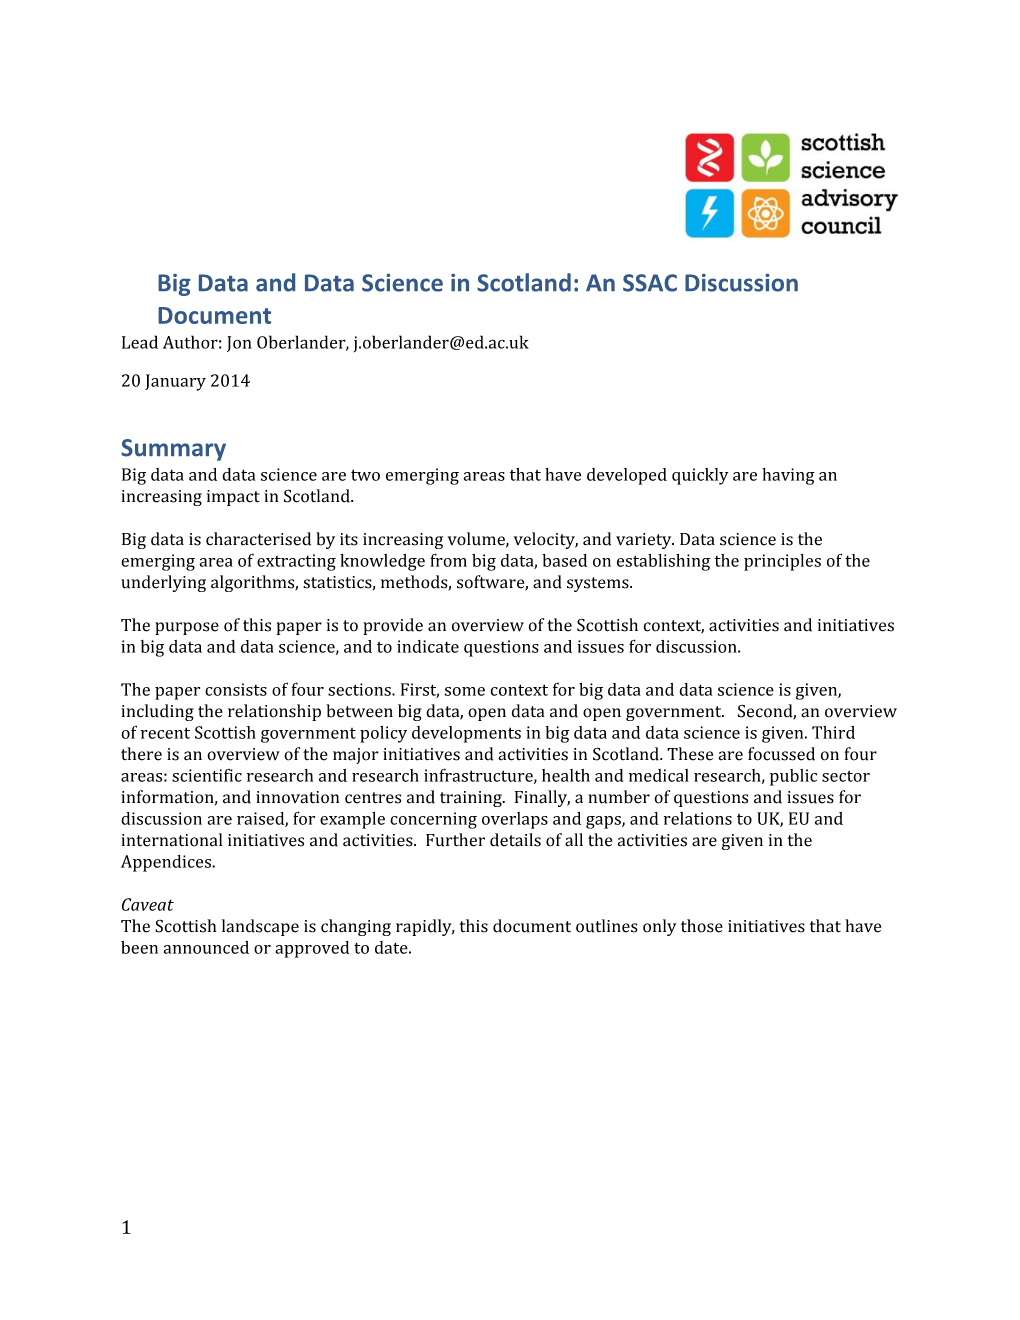 Big Data and Data Science in Scotland: an SSAC Discussion Document